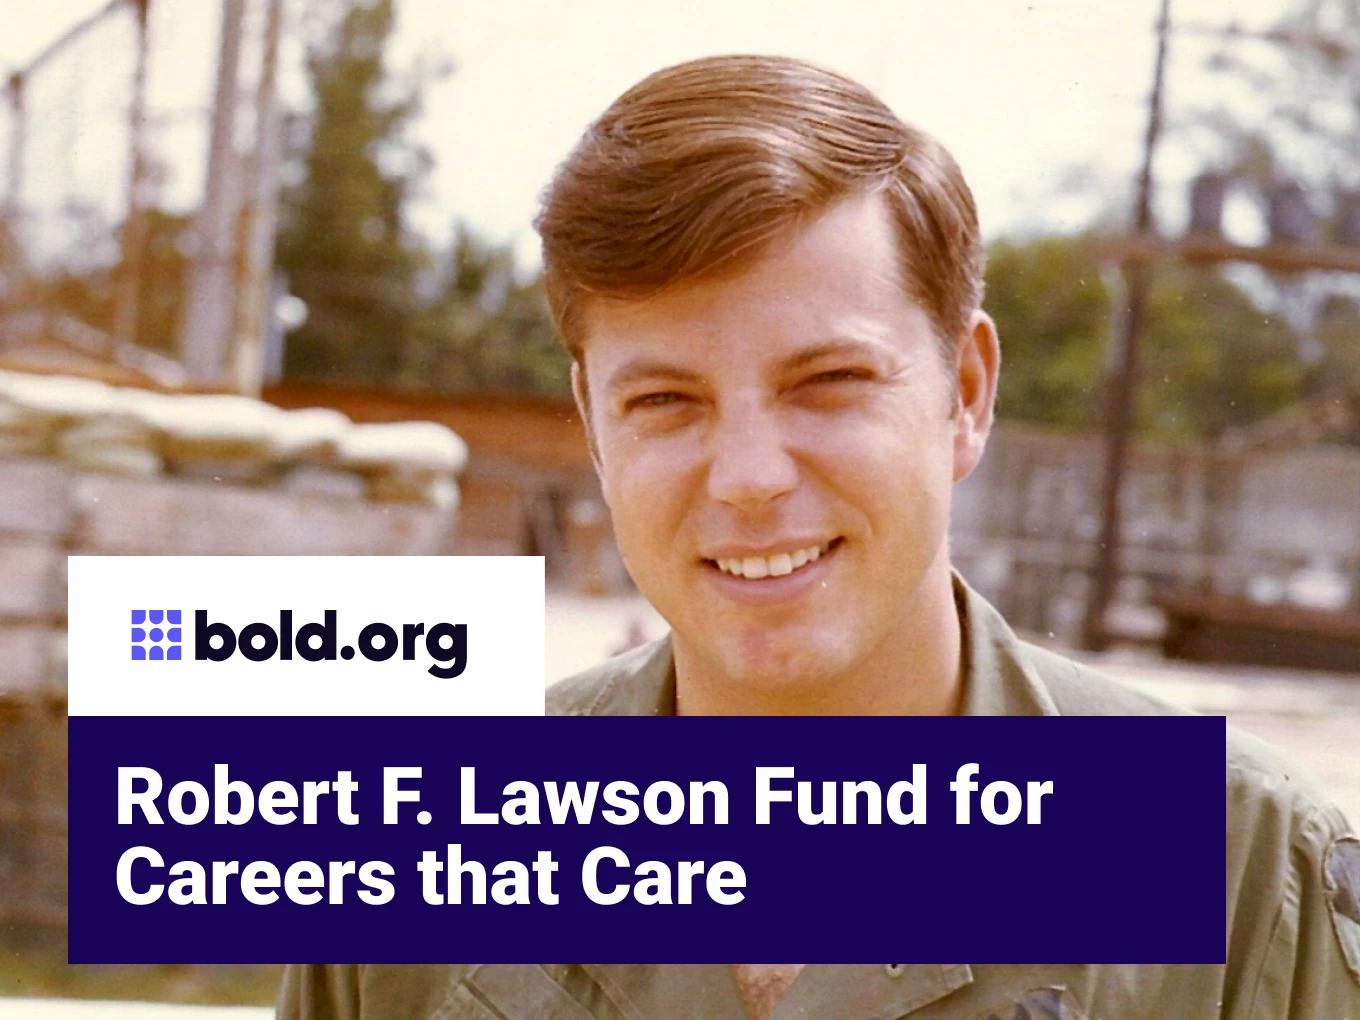 Robert F. Lawson Fund for Careers that Care